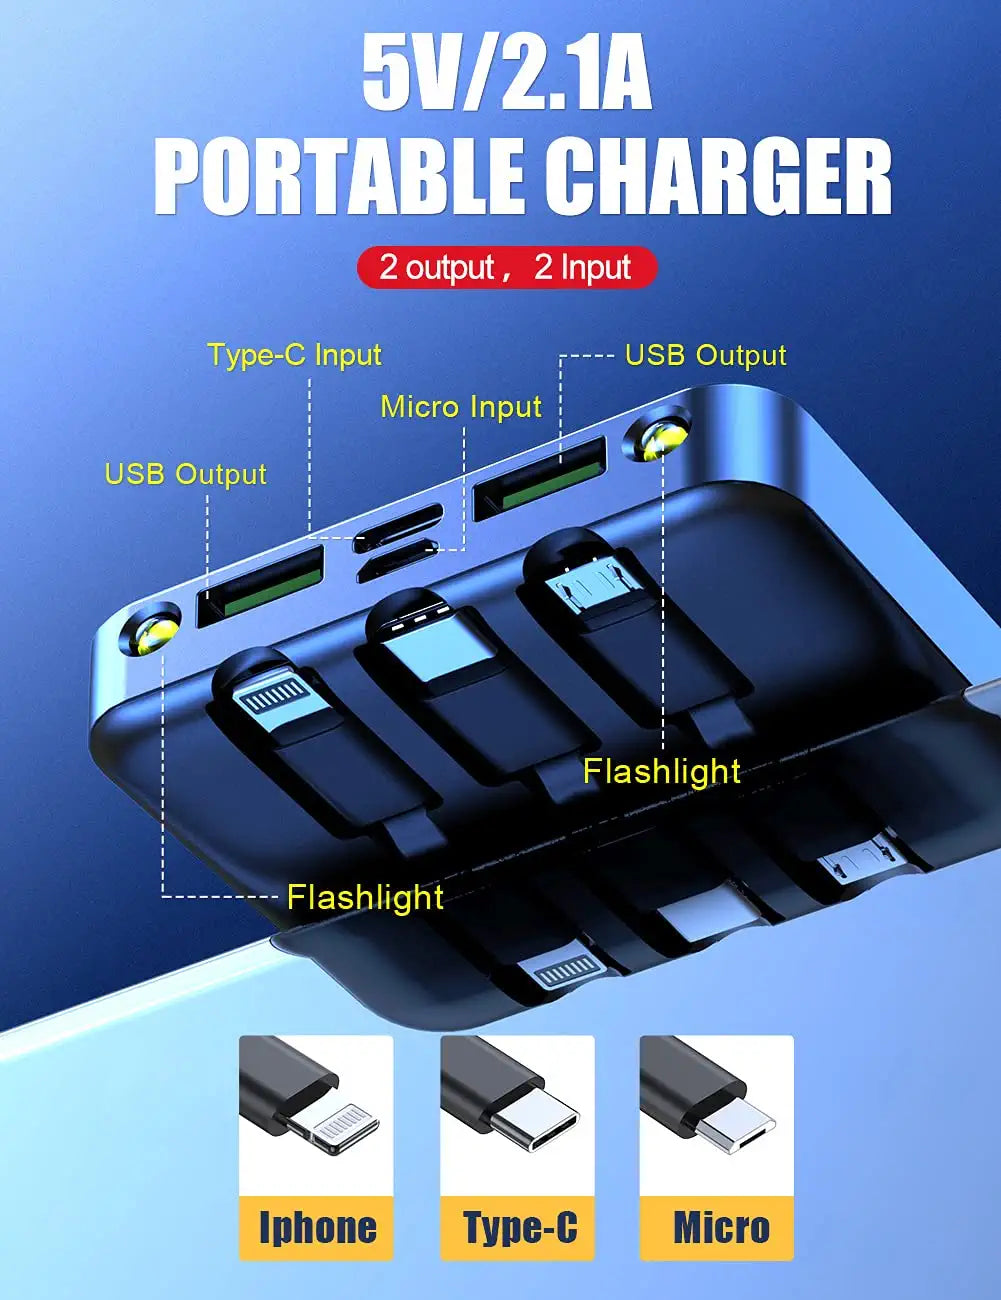 10000Mah Power Bank, LED Display Portable Charger Phone Battery Pack, External Battery Pack Dual USB Ports, 5V/2.1A Outputs & Input, Built-In 3 Cable, Compatible Iphone, Ipad, Samsung Galaxy,And More